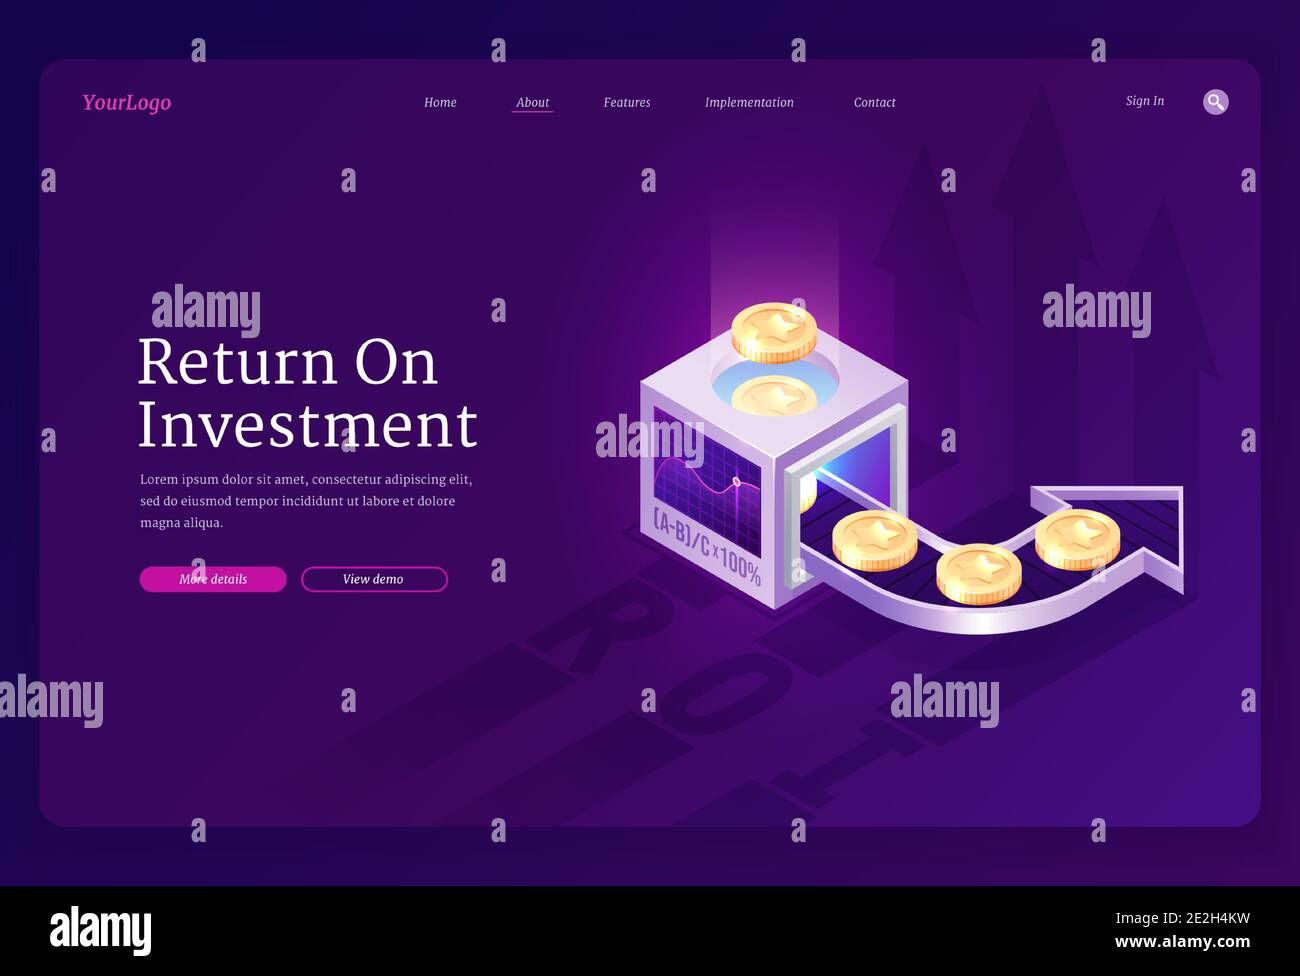 Return On Investment Banner Concept Of Revenue Growth From Funds